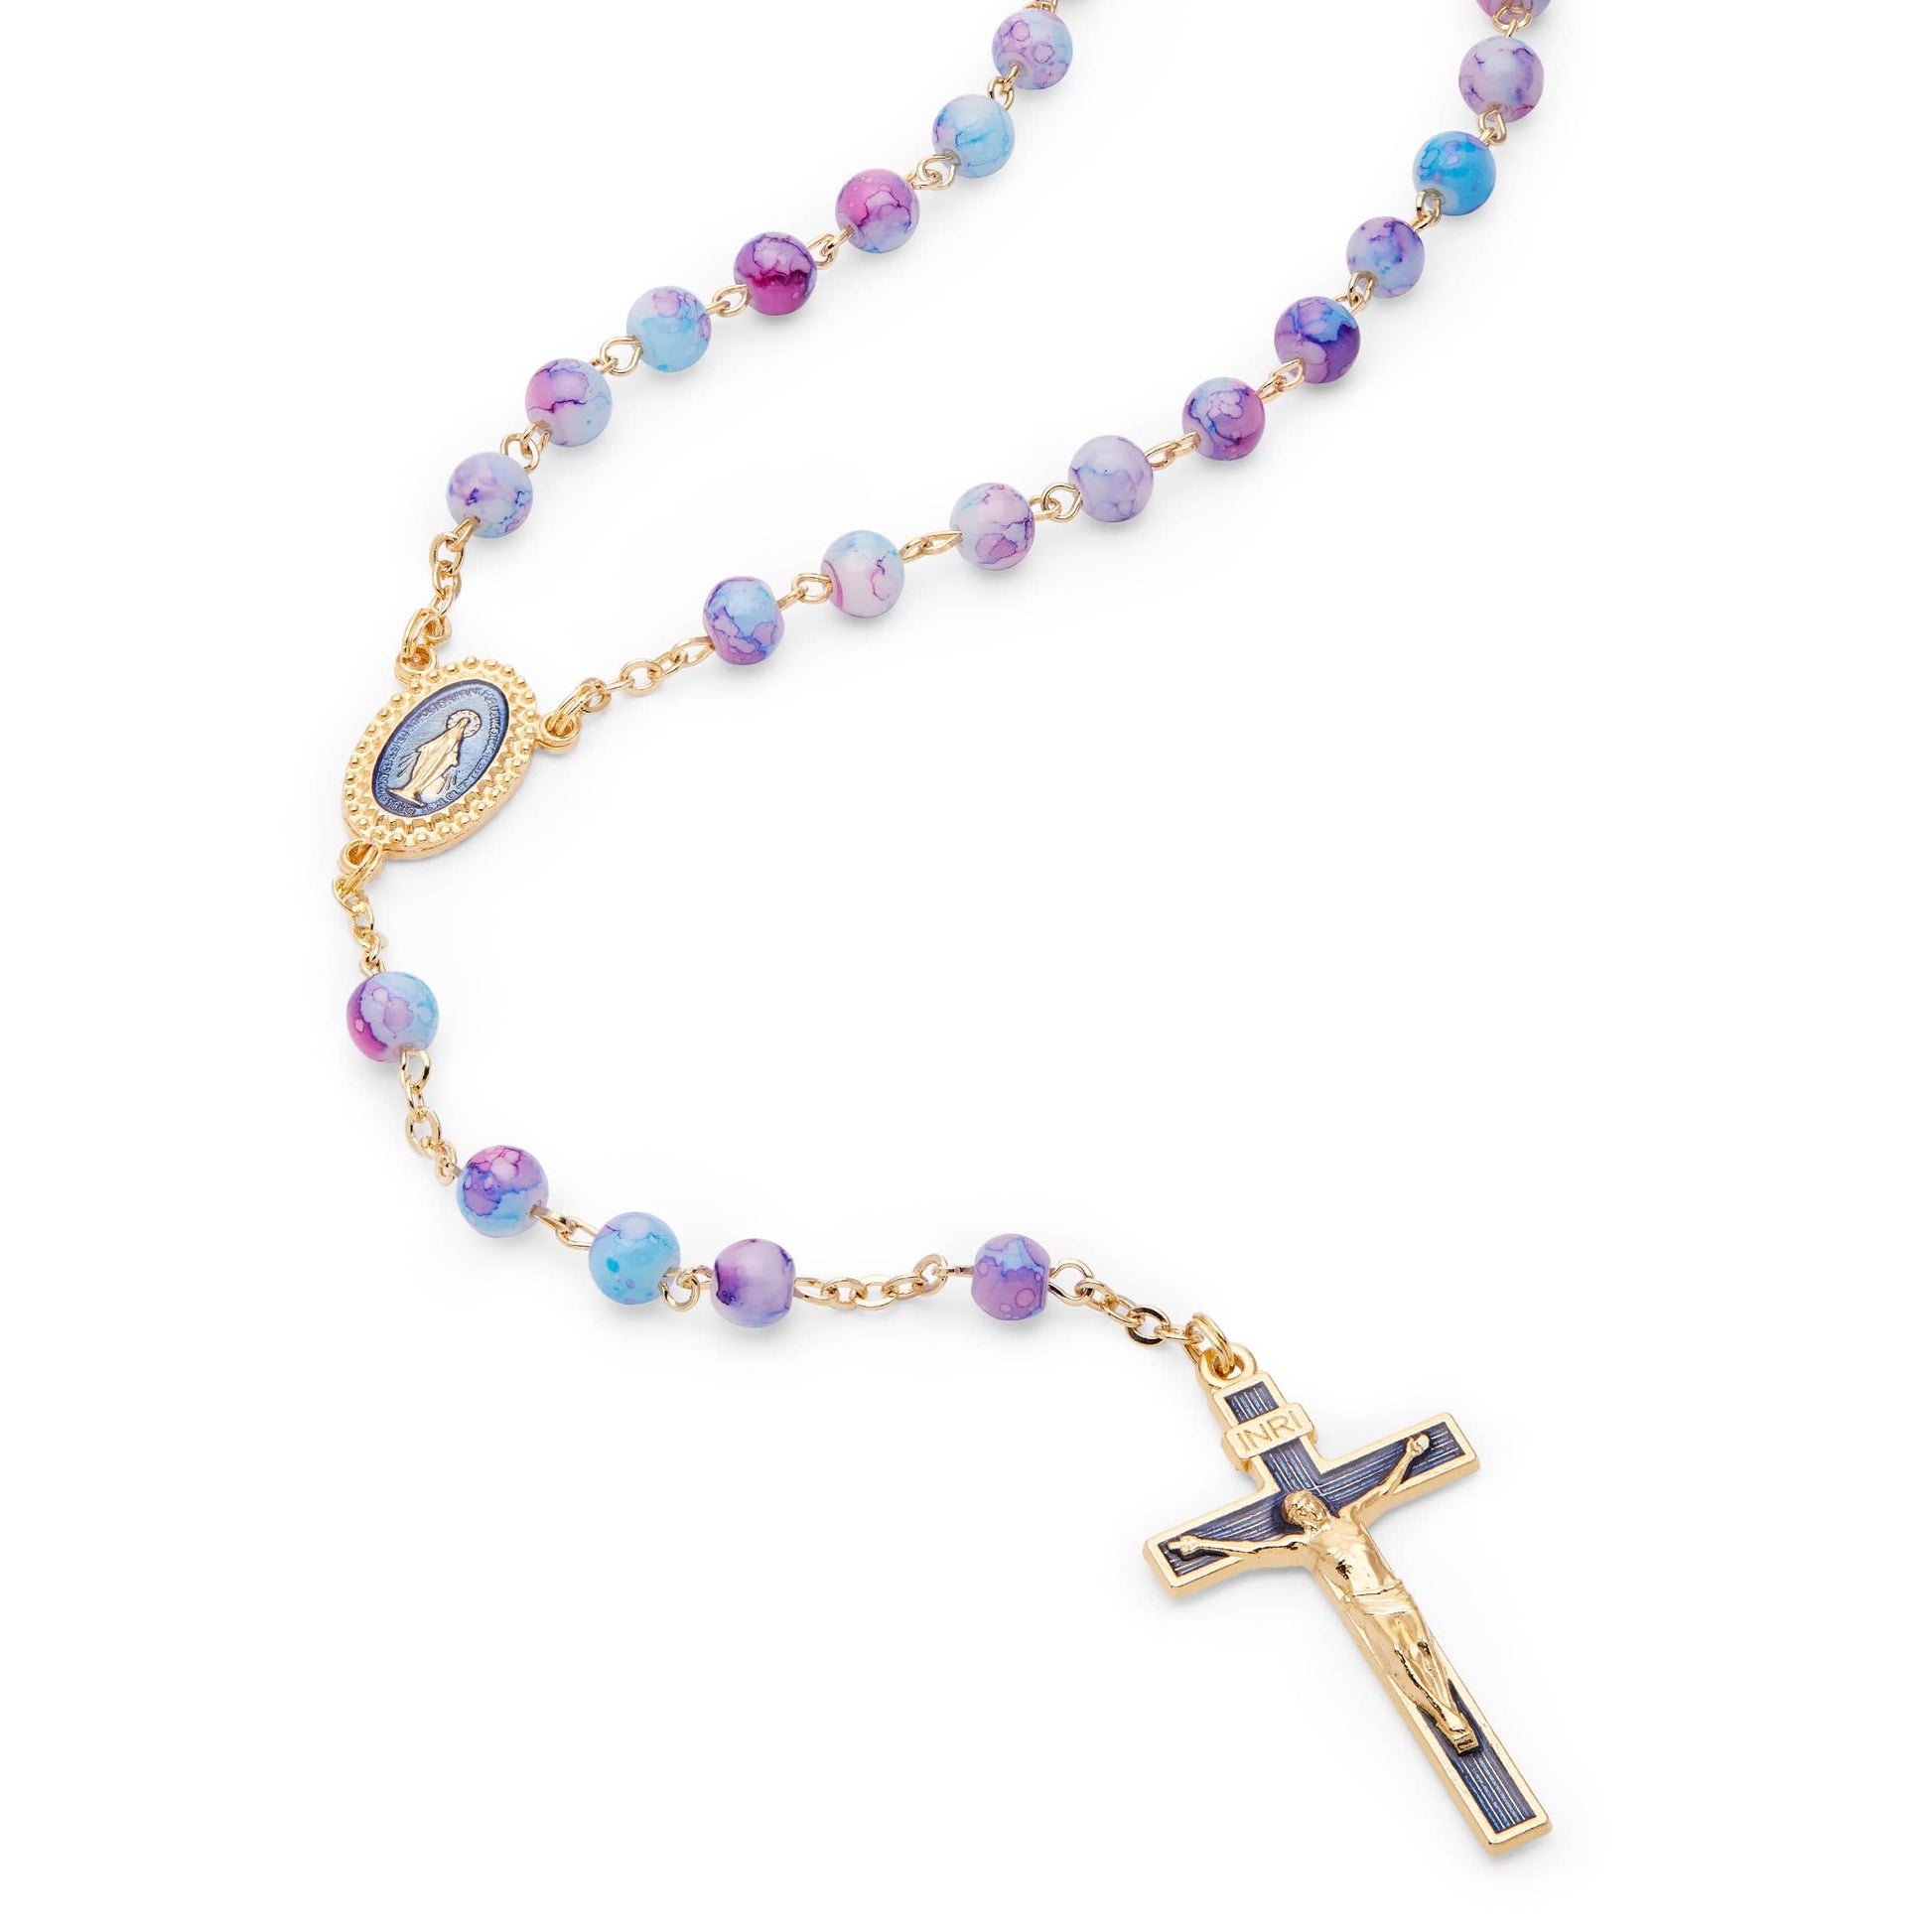 MONDO CATTOLICO Prayer Beads 47 cm (18.5 in) / 6 mm (0.24 in) Pink and Blue Variegated Glass Rosary of The Miraculous Virgin Mary